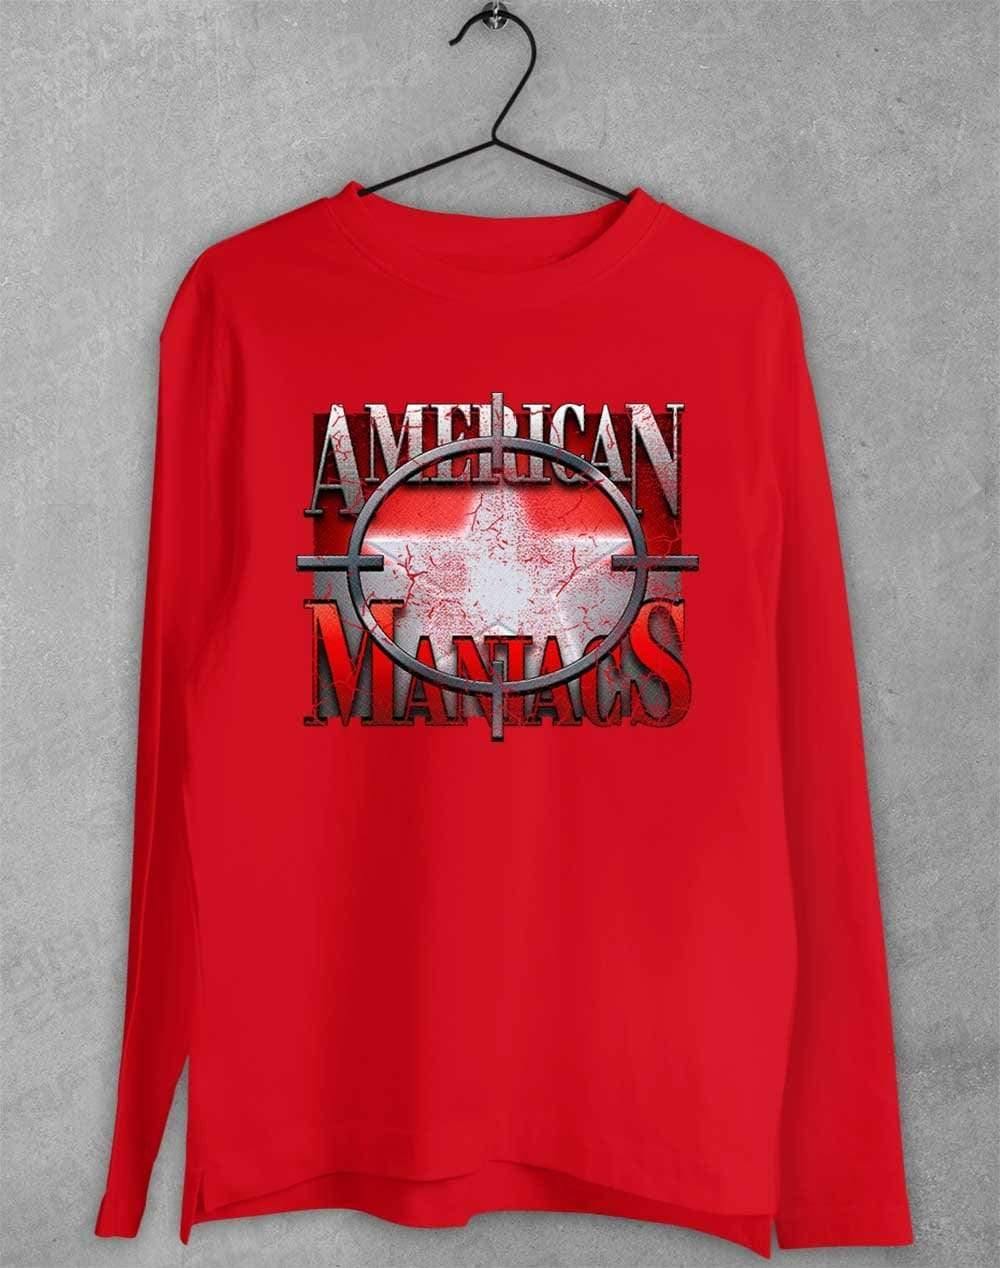 American Maniacs - Long Sleeve T-Shirt S / Red  - Off World Tees